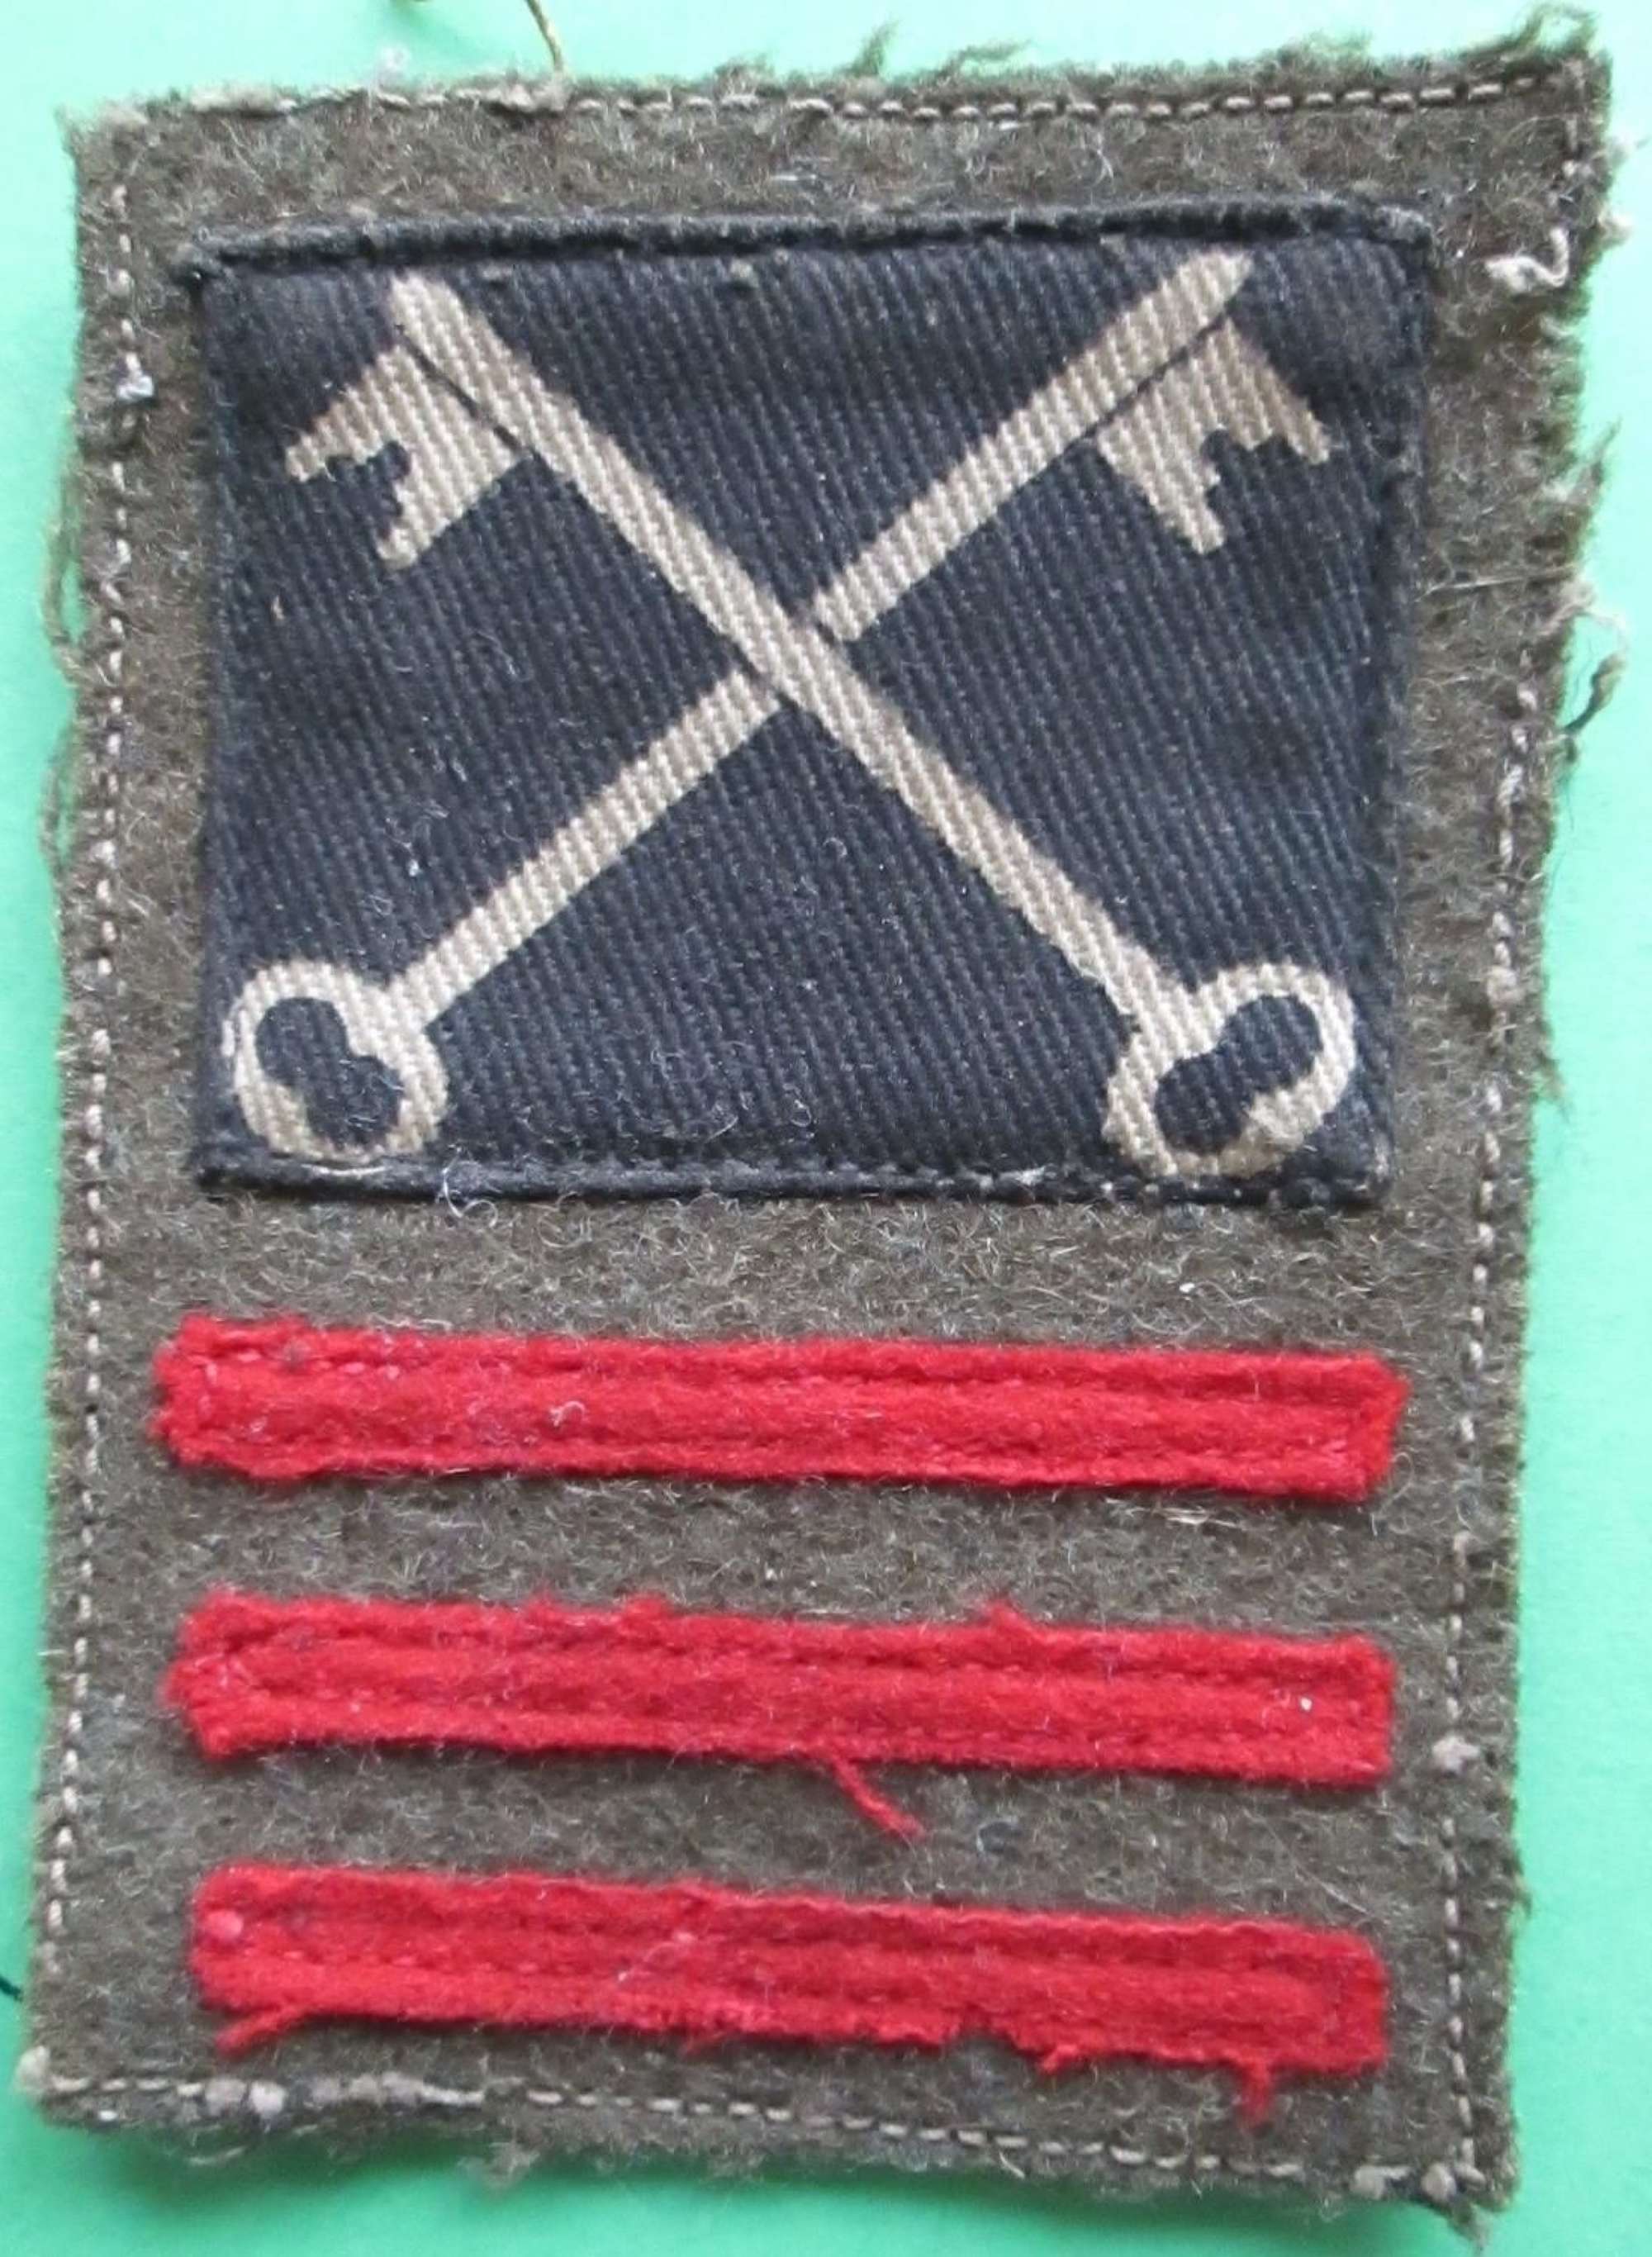 A 2ND INFANTRY DIVISION COMBINATION